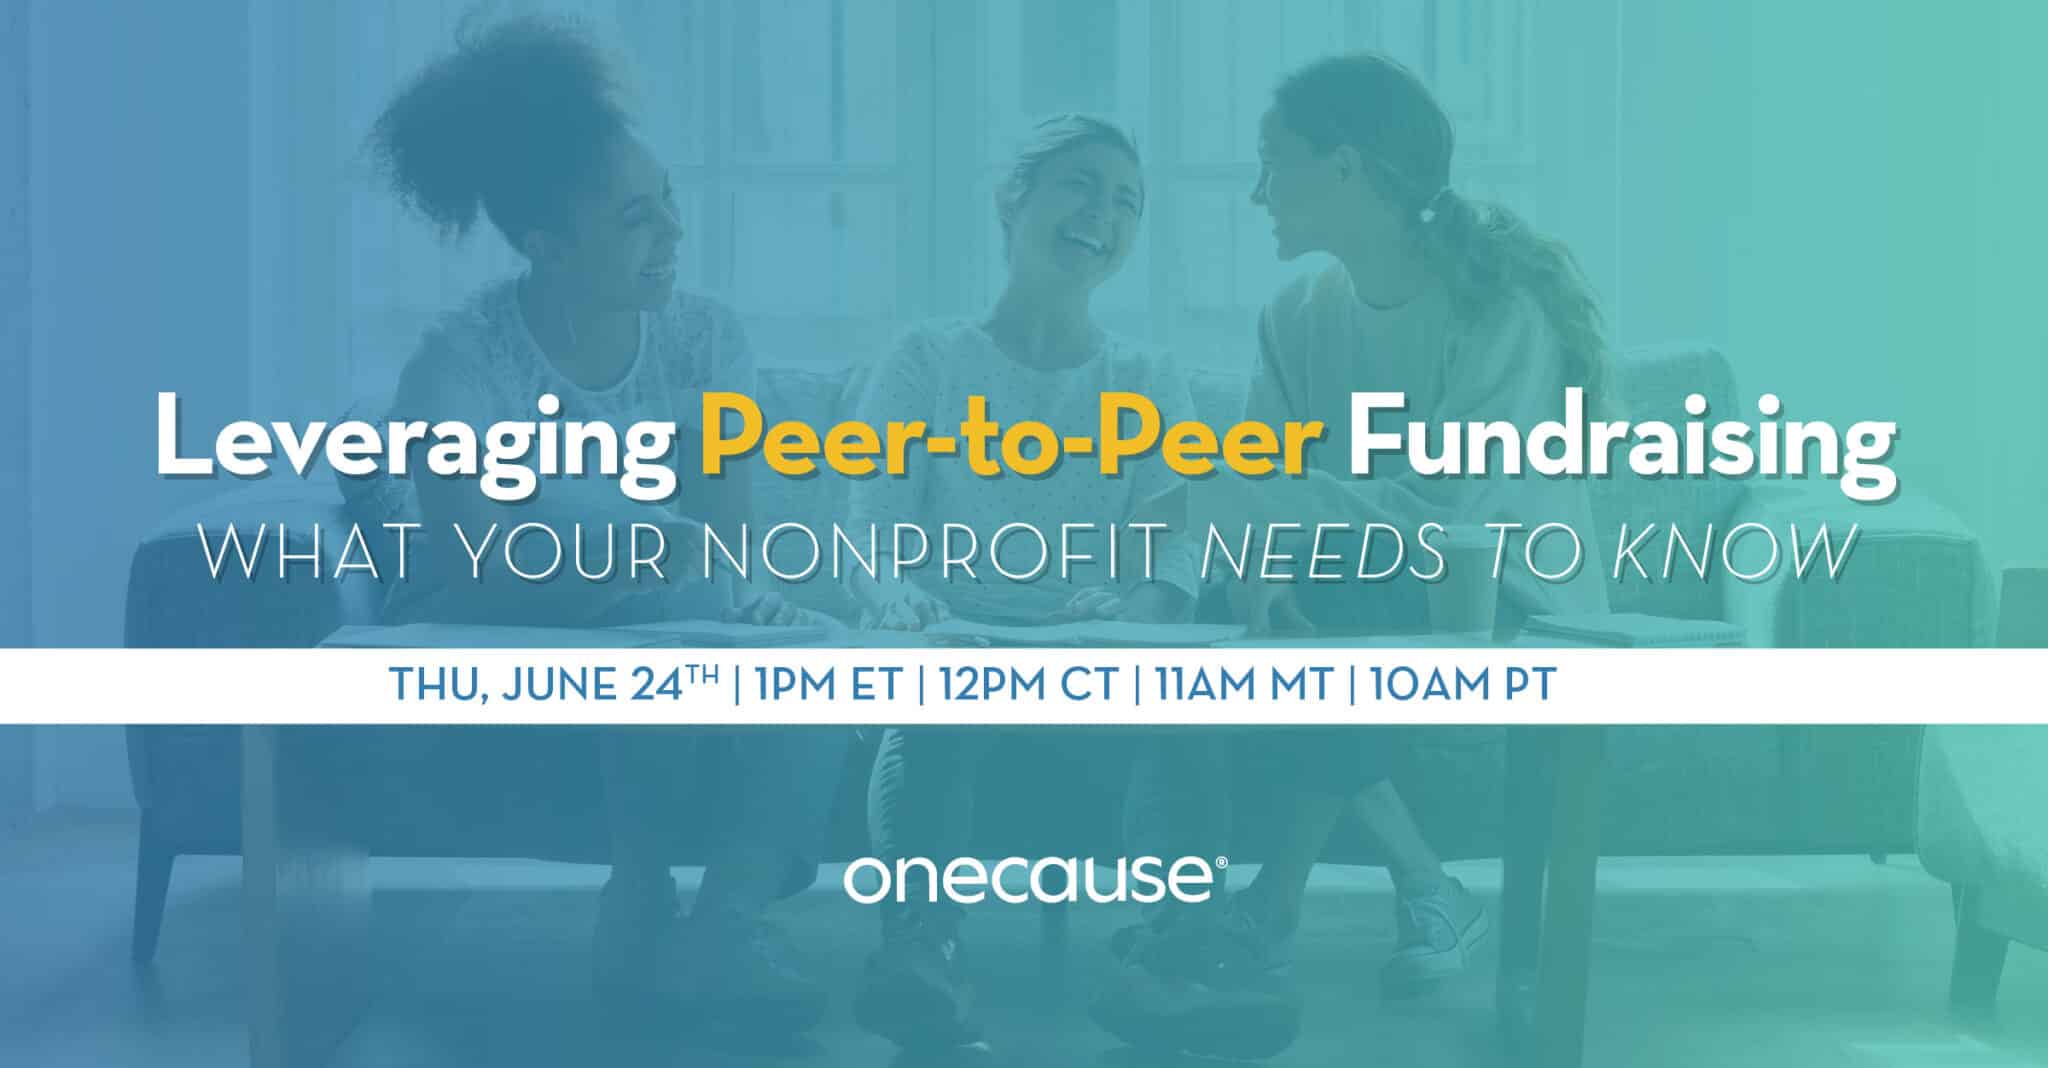 Leveraging Peer-to-Peer Fundraising: What Your Nonprofit Needs to Know